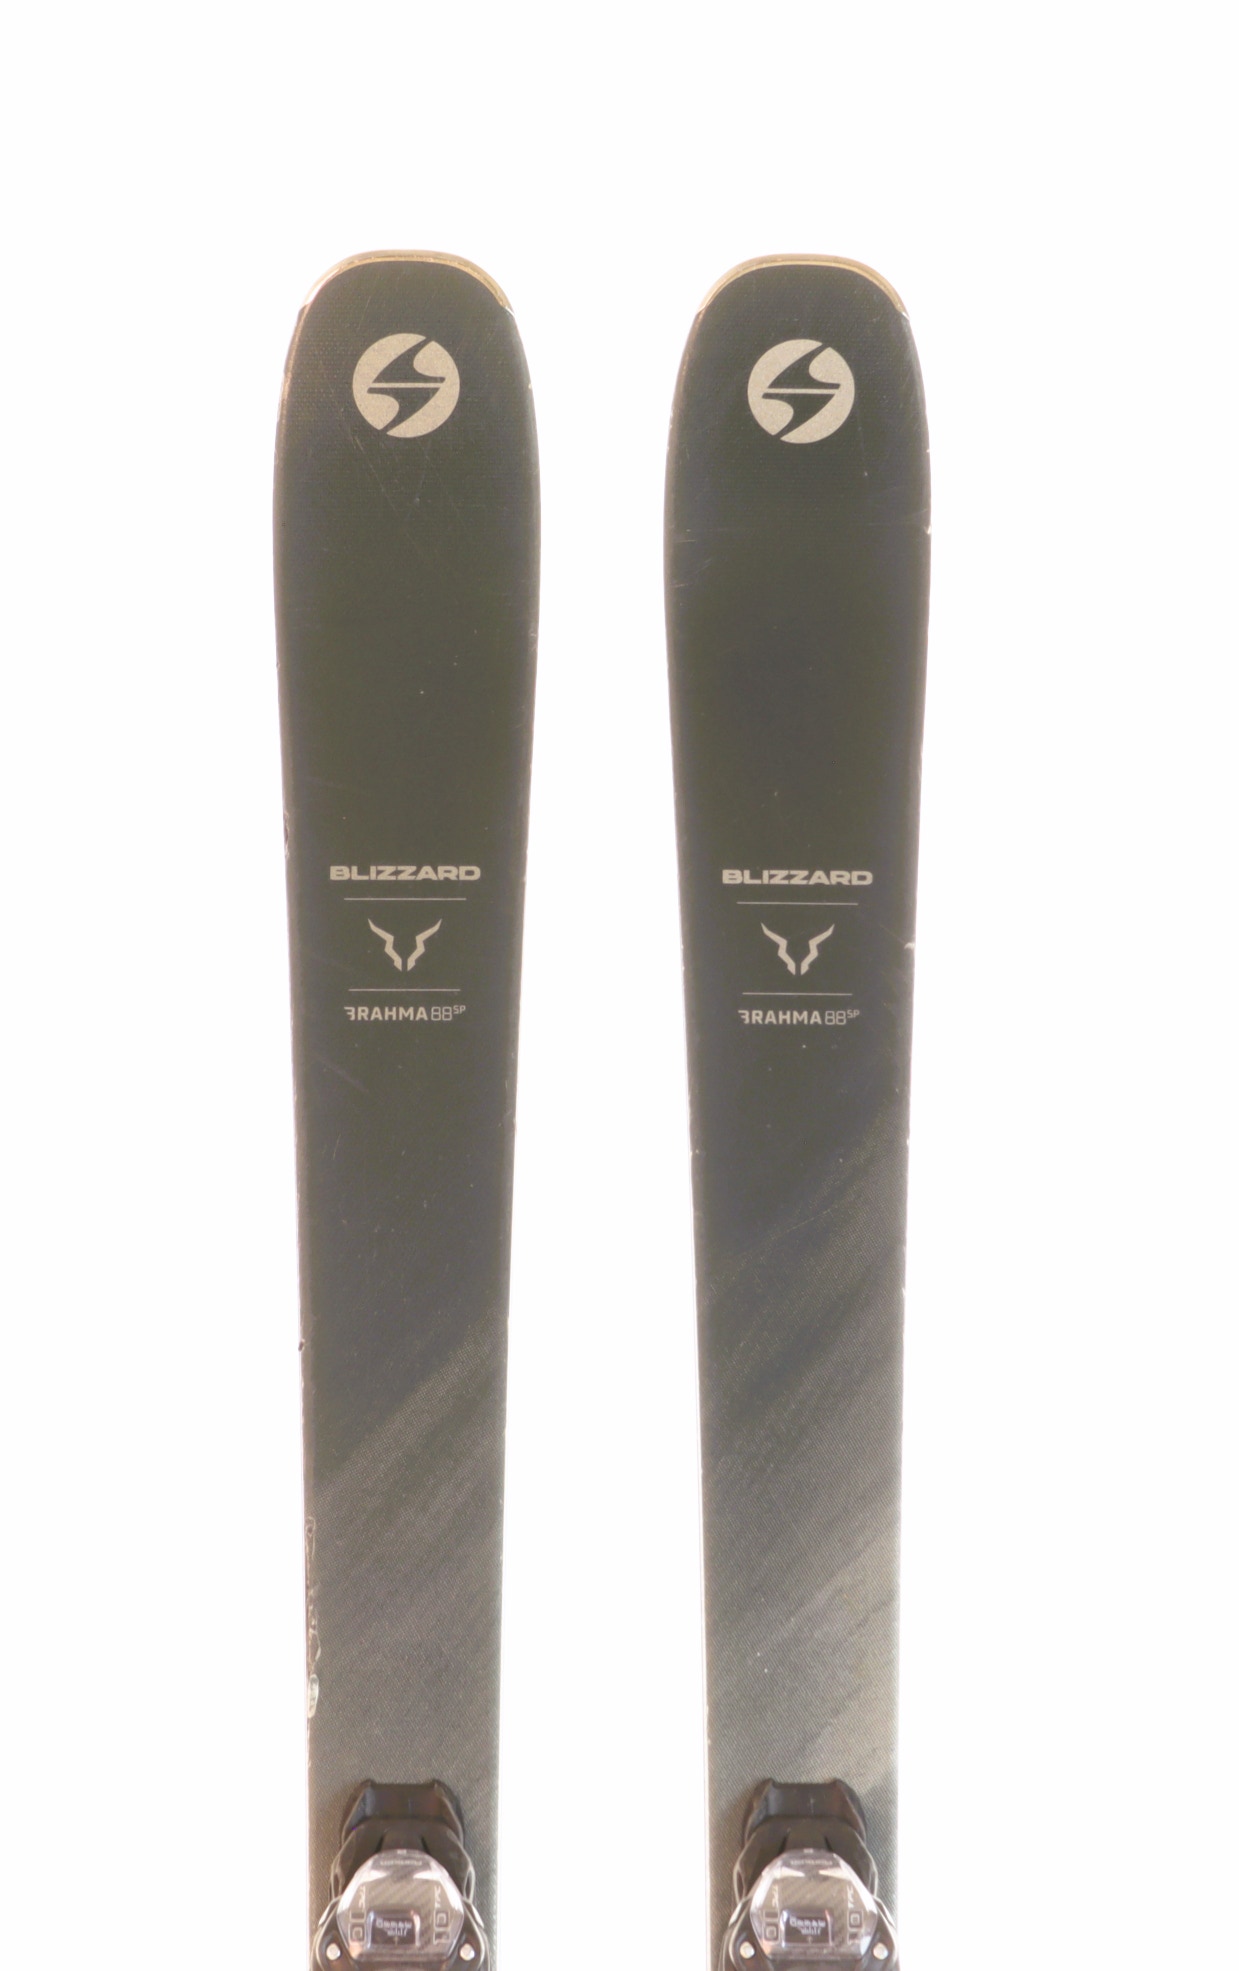 Used 2022 Blizzard Brahma 88 SP Skis with Marker TCX 11 Bindings Size 171 (Option 230872)